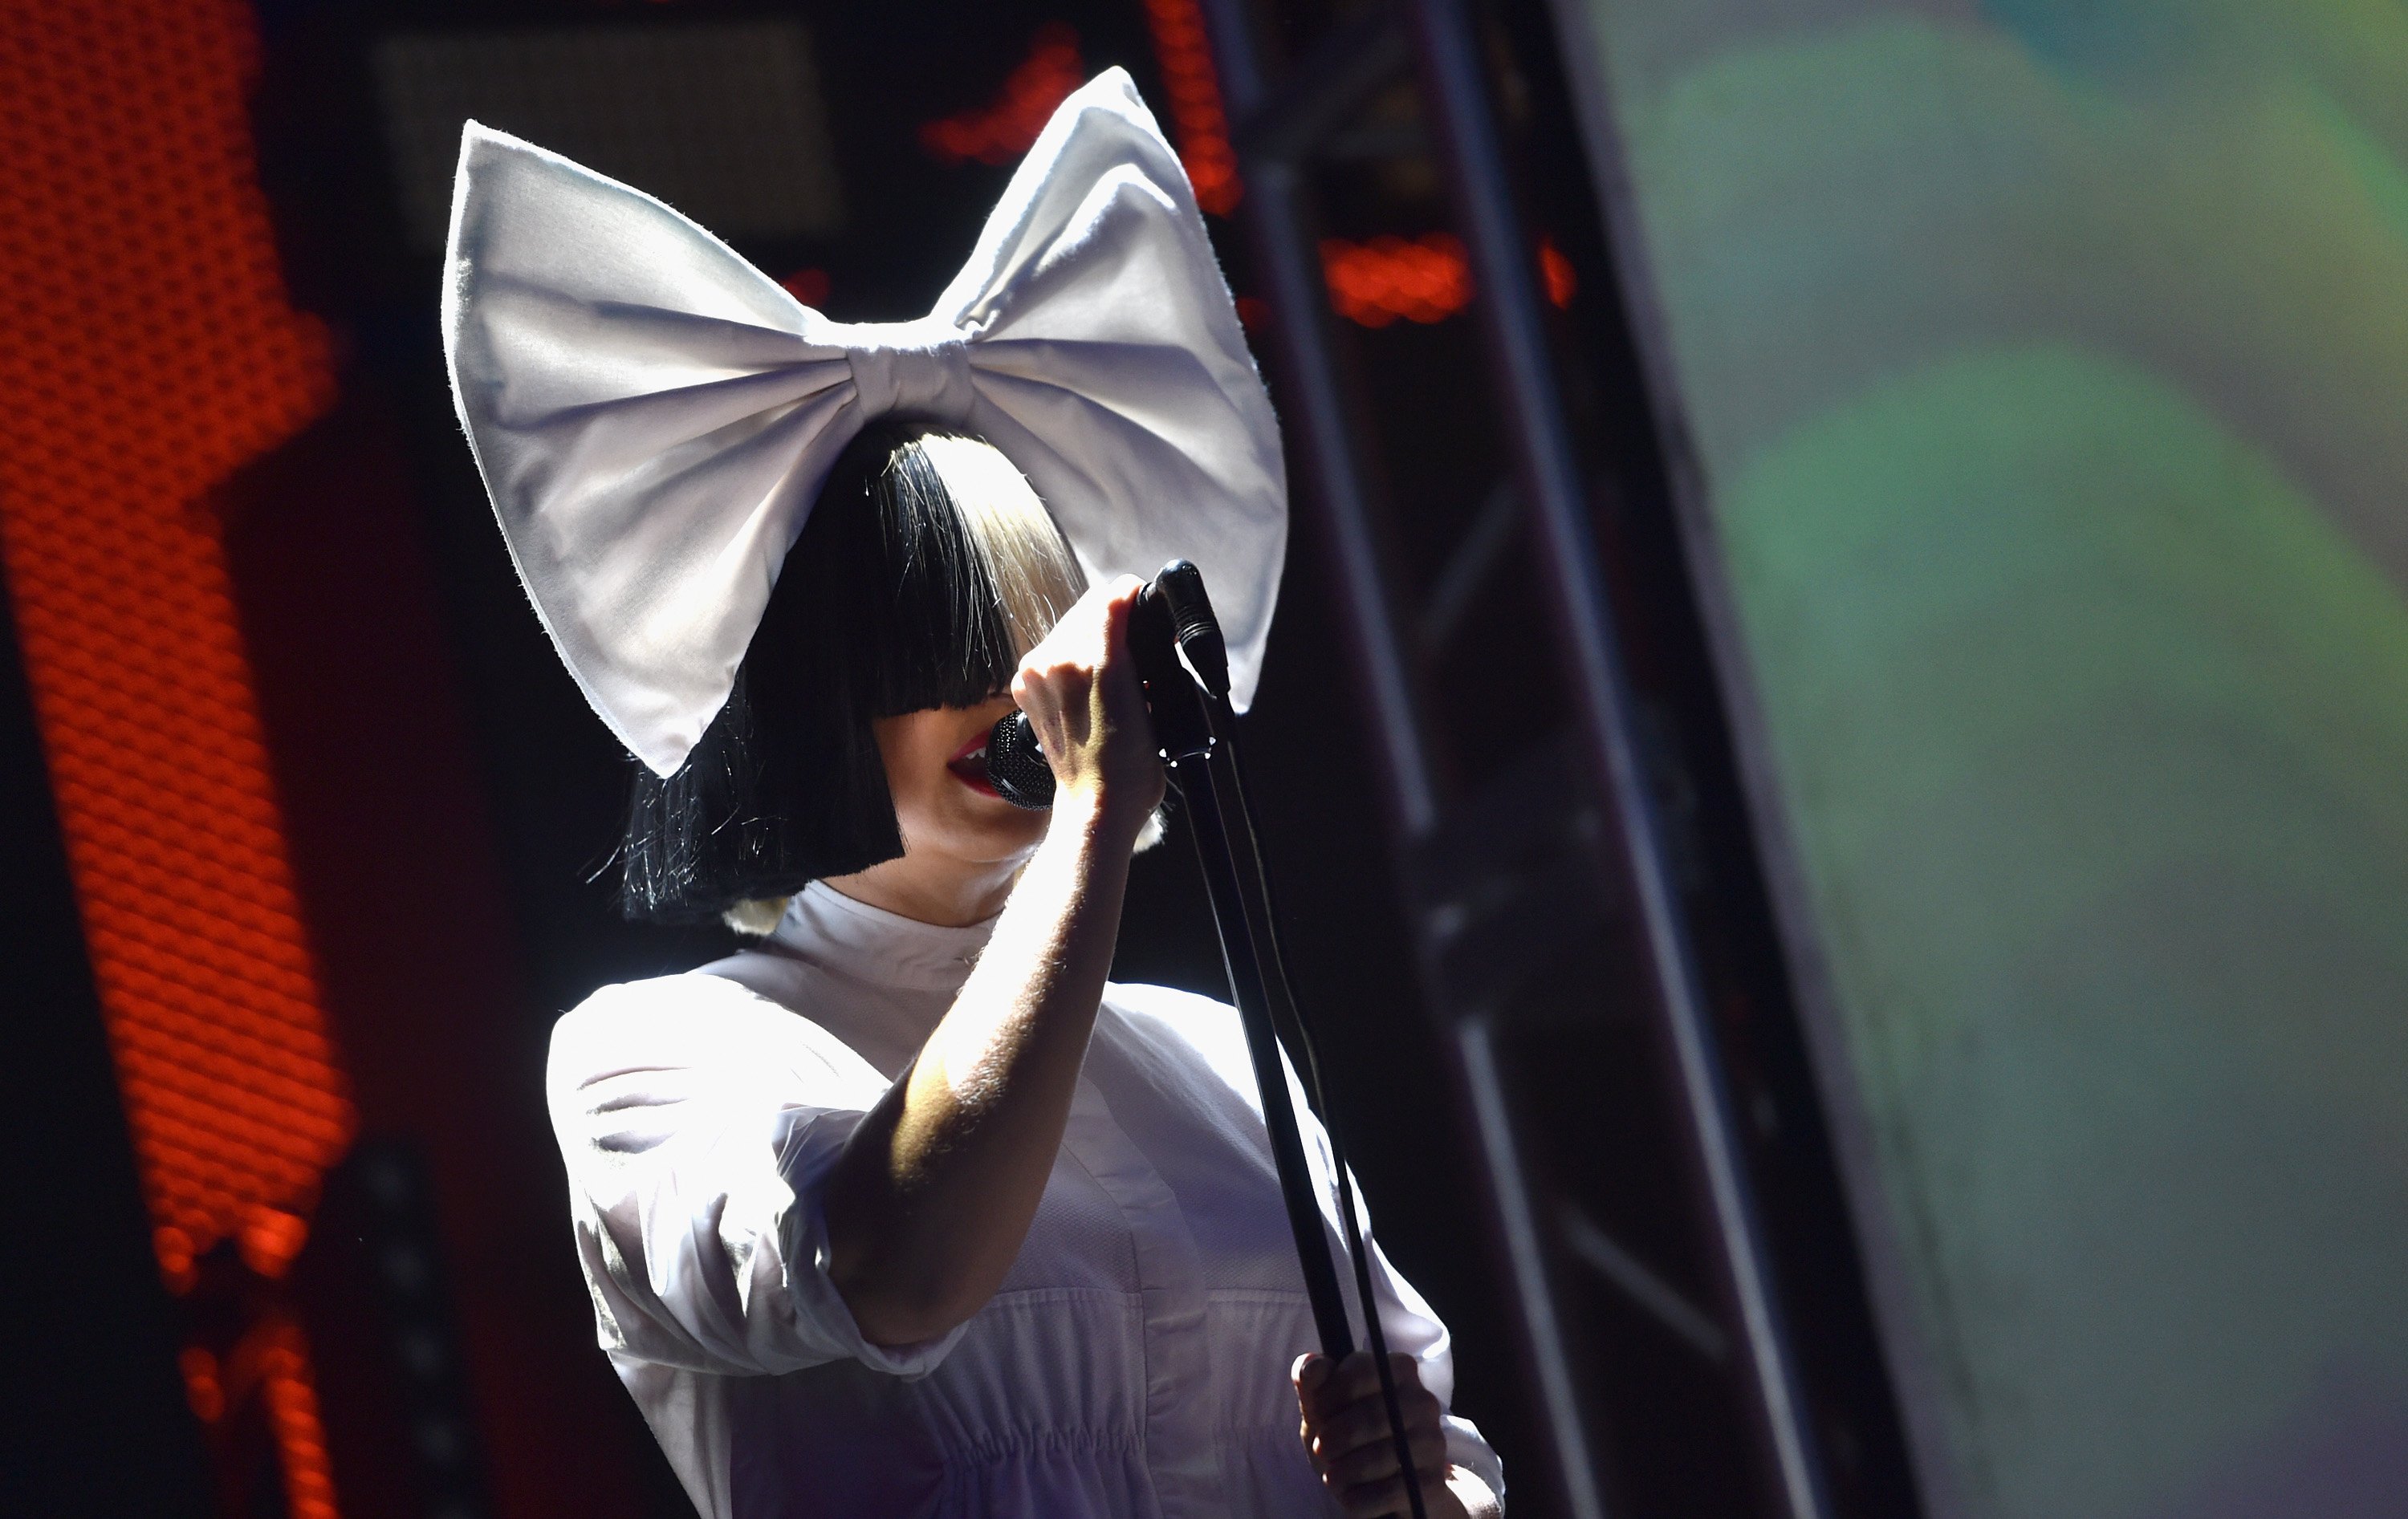 Sia performs onstage at the 2016 iHeartRadio Music Festival at T-Mobile Arena on September 23, 2016 | Photo: GettyImages